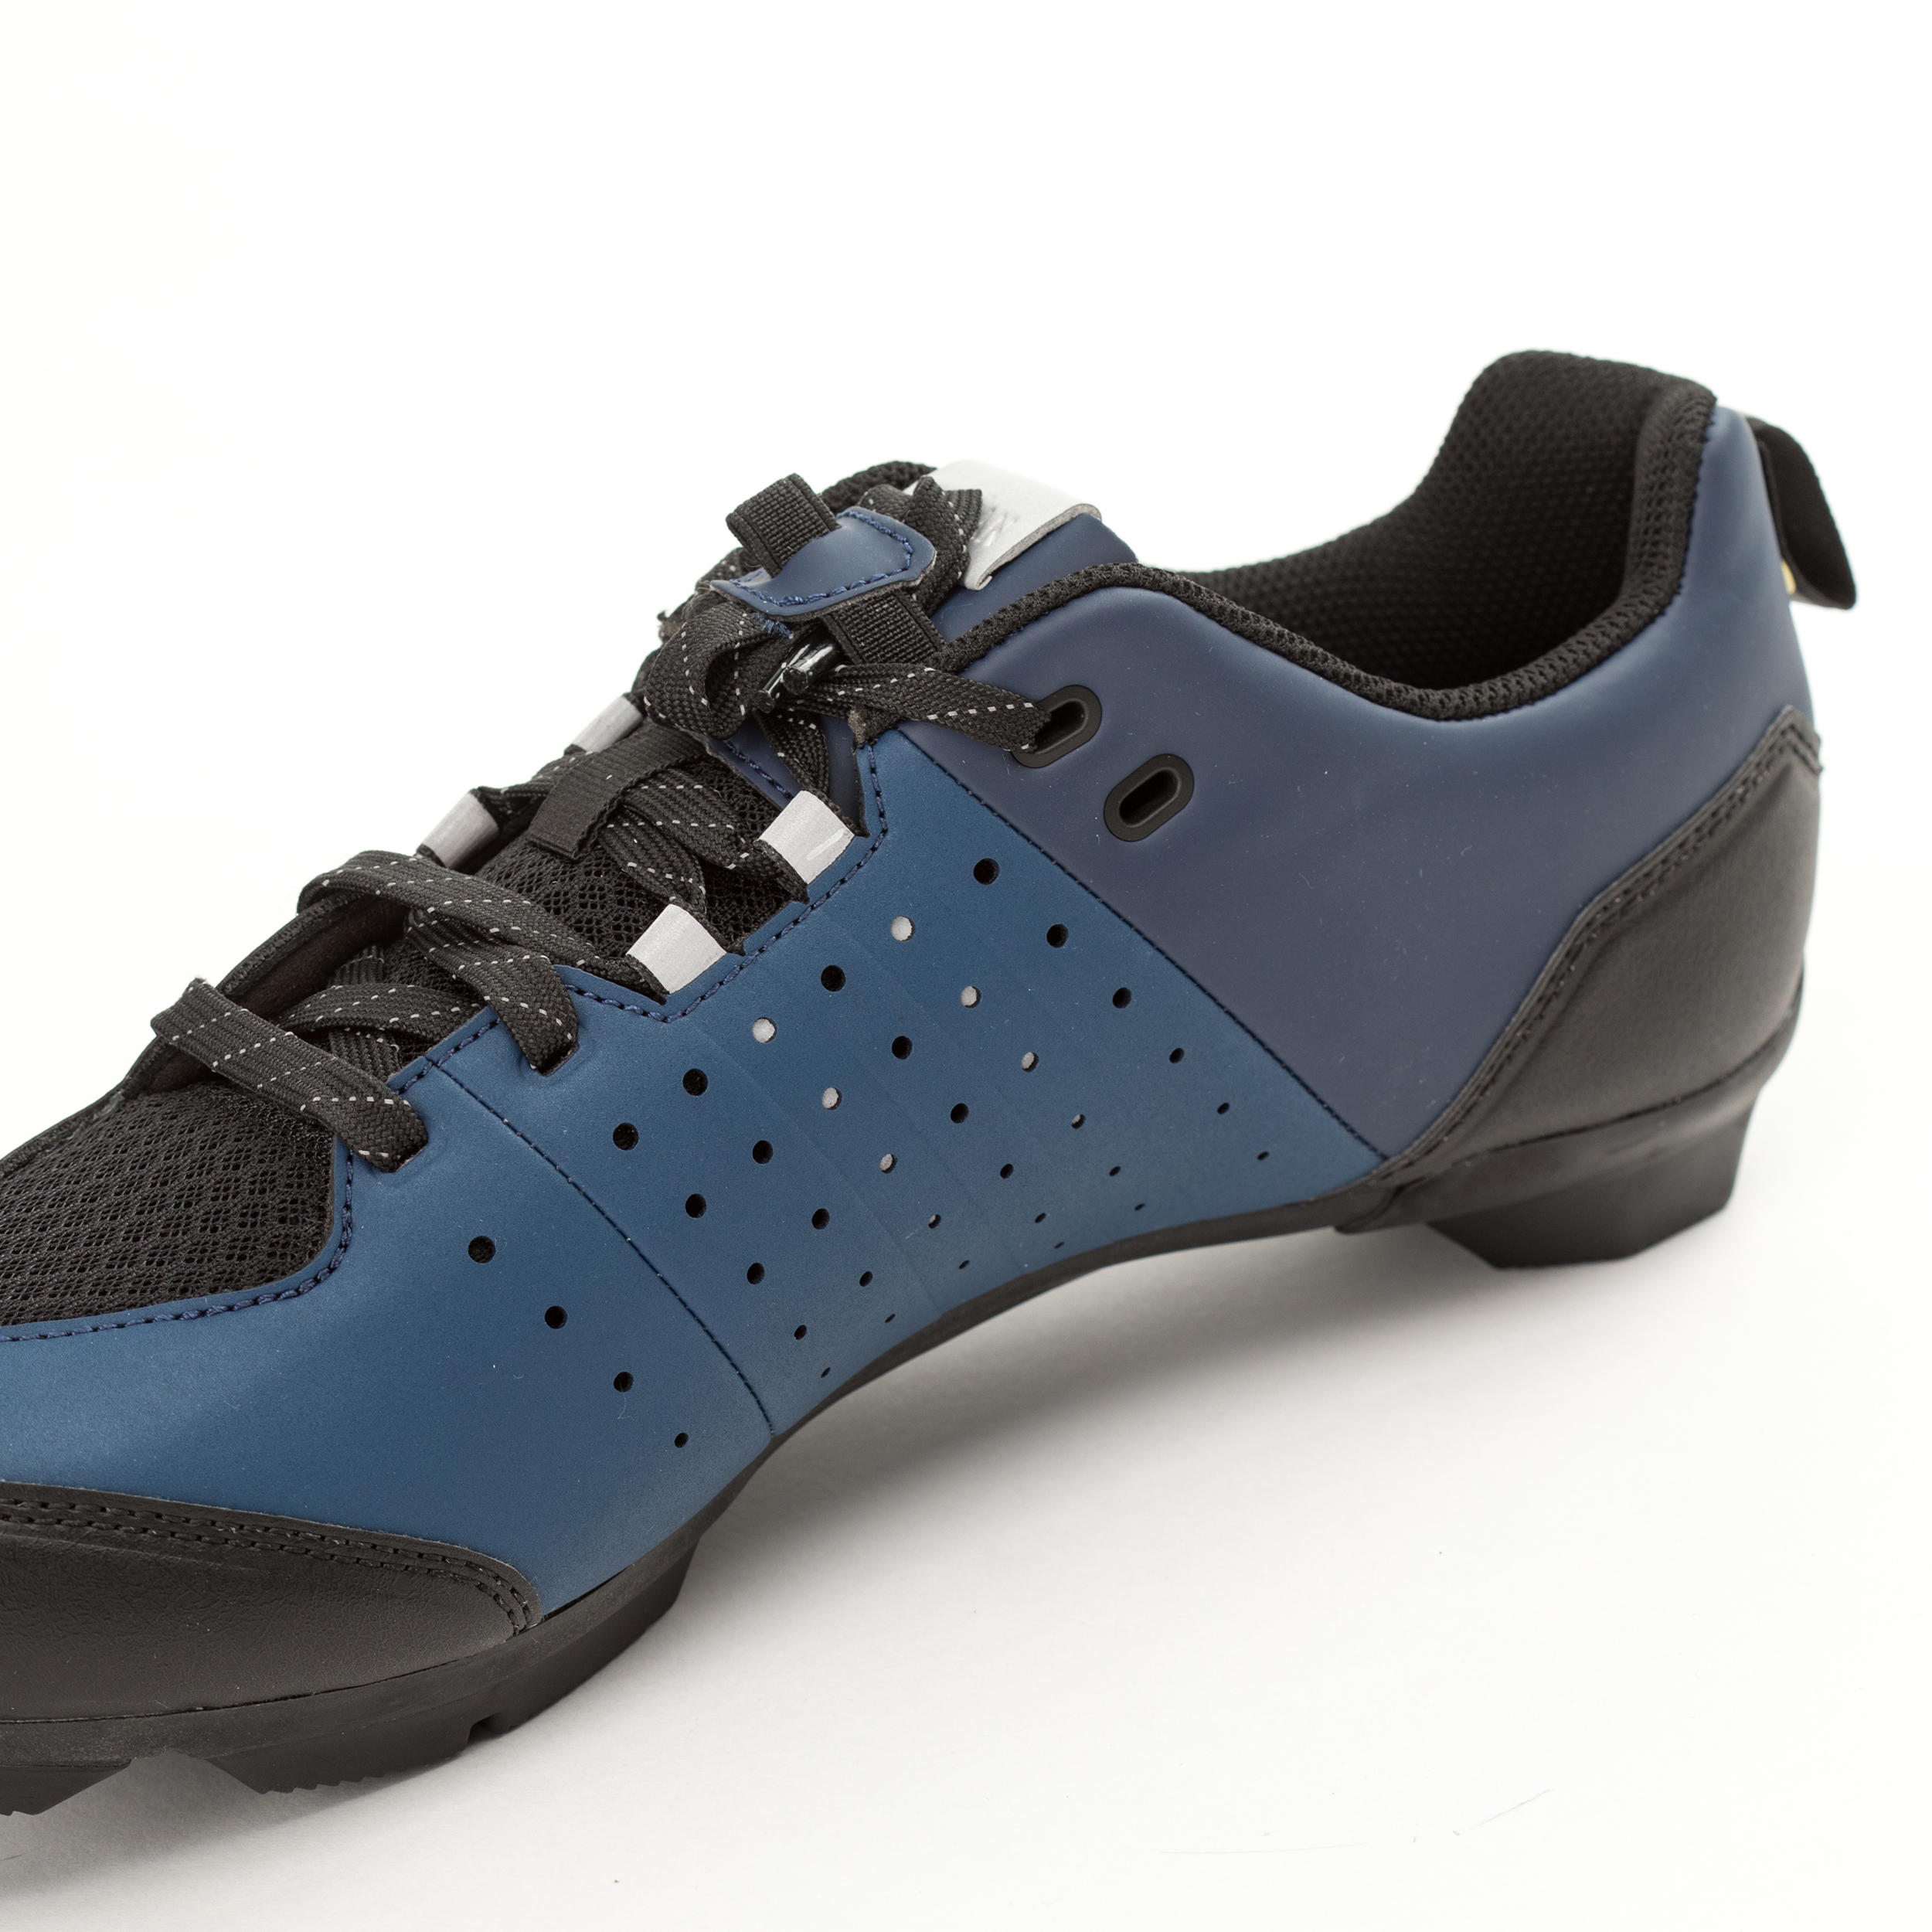 Road and Gravel Cycling Lace-Up SPD Shoes GRVL 500 - Blue / Navy 7/8